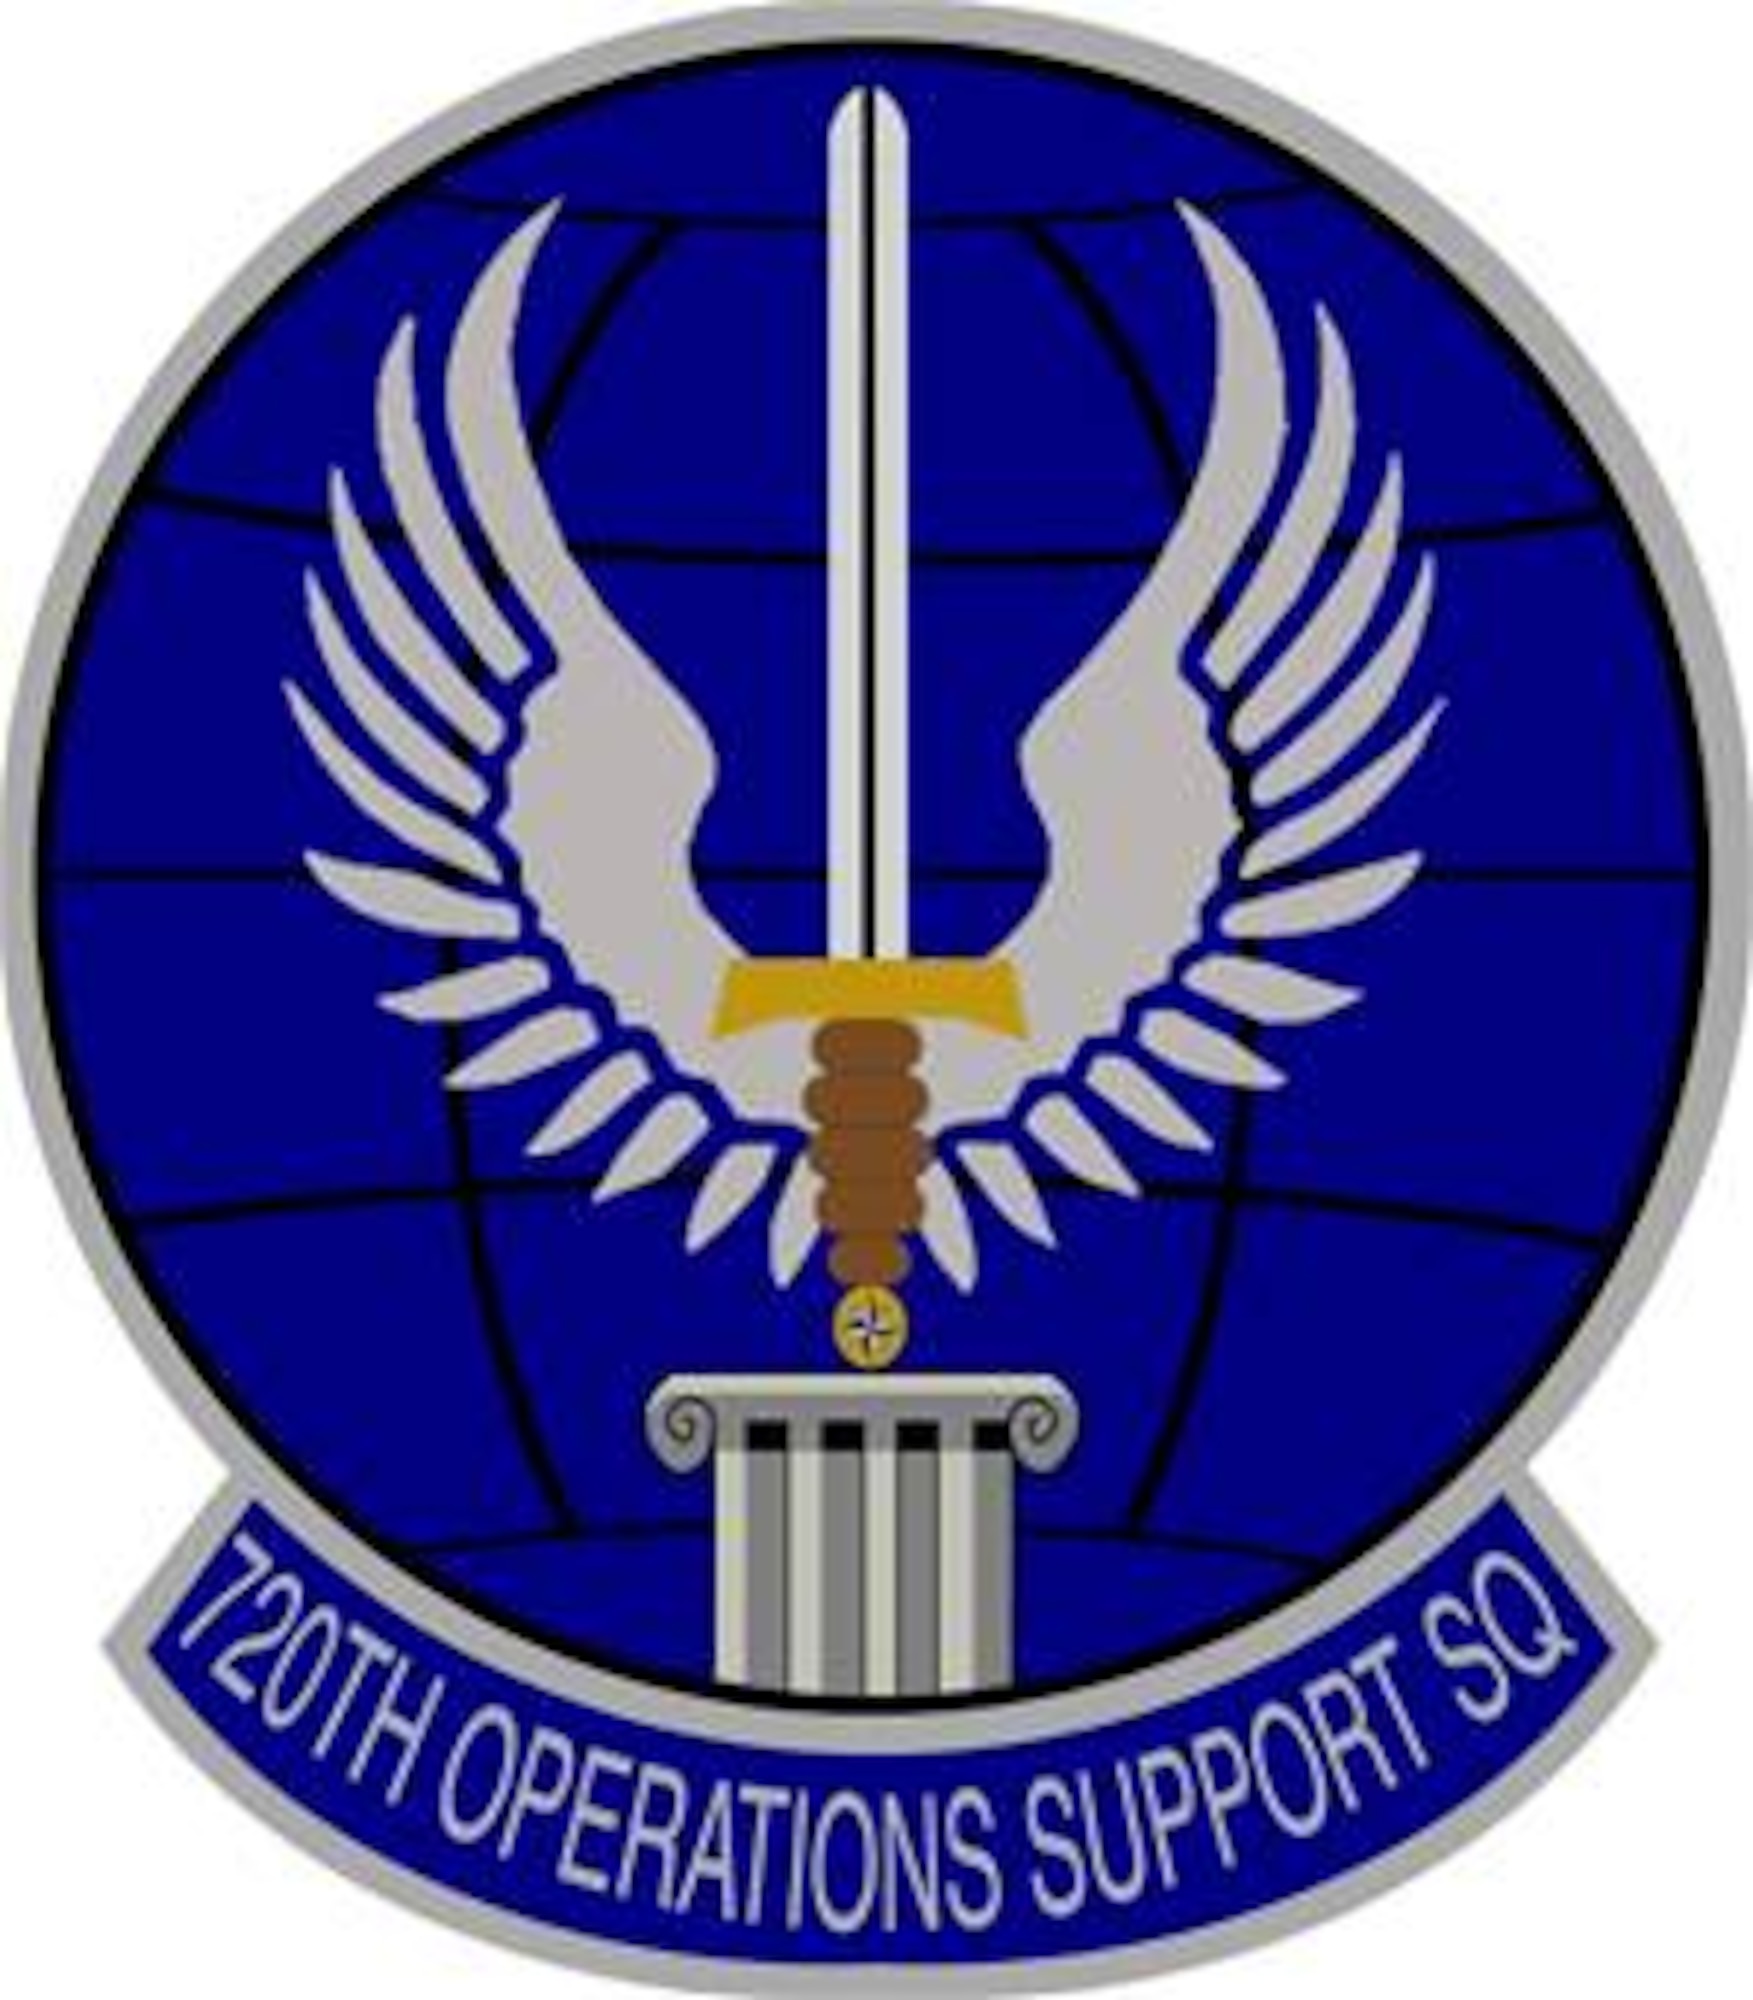 720th Operations Support Squadron emblem significance:
Ultramarine blue and Air Force yellow are the Air Force colors. Blue alludes to the sky, the primary theater of Air Force operations.Yellow refers to the sun and the excellence required of Air Force personnel. The grid lined globe denotes the world wide commitment of the squadron. The winged sword represents the excellence expected of all Air Force members. The compass rose symbolizes the battlefield Airmen whose operational capabilities are enabled by the squadron. The pillar supporting the sword represents the squadron itself.